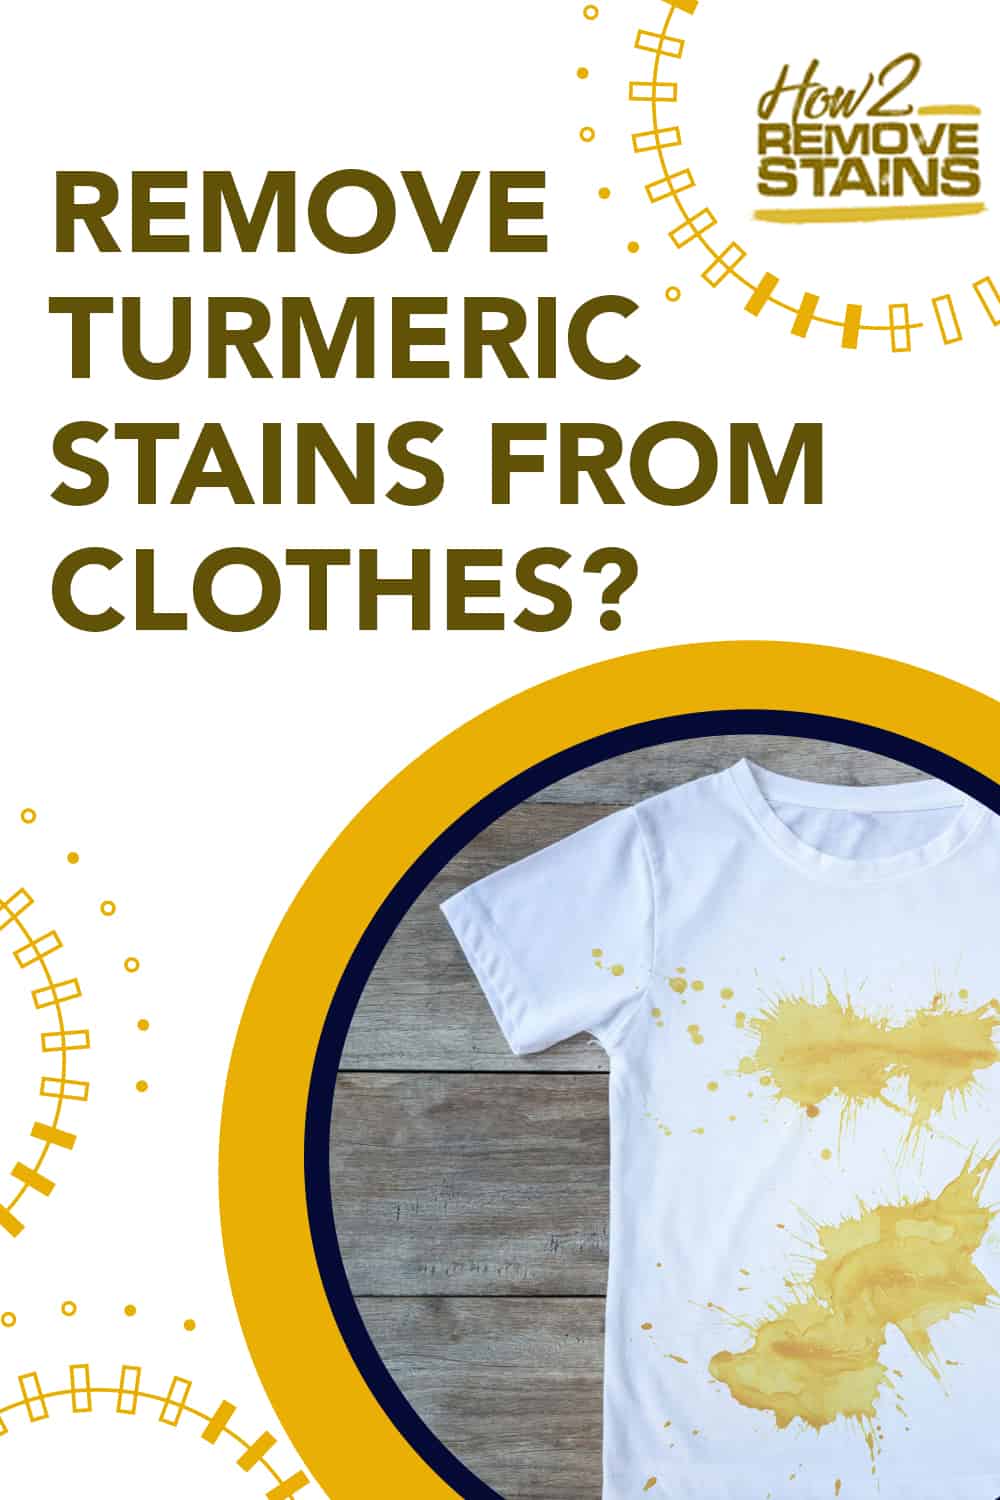 How to remove turmeric stains from clothes [ Detailed Answer ]